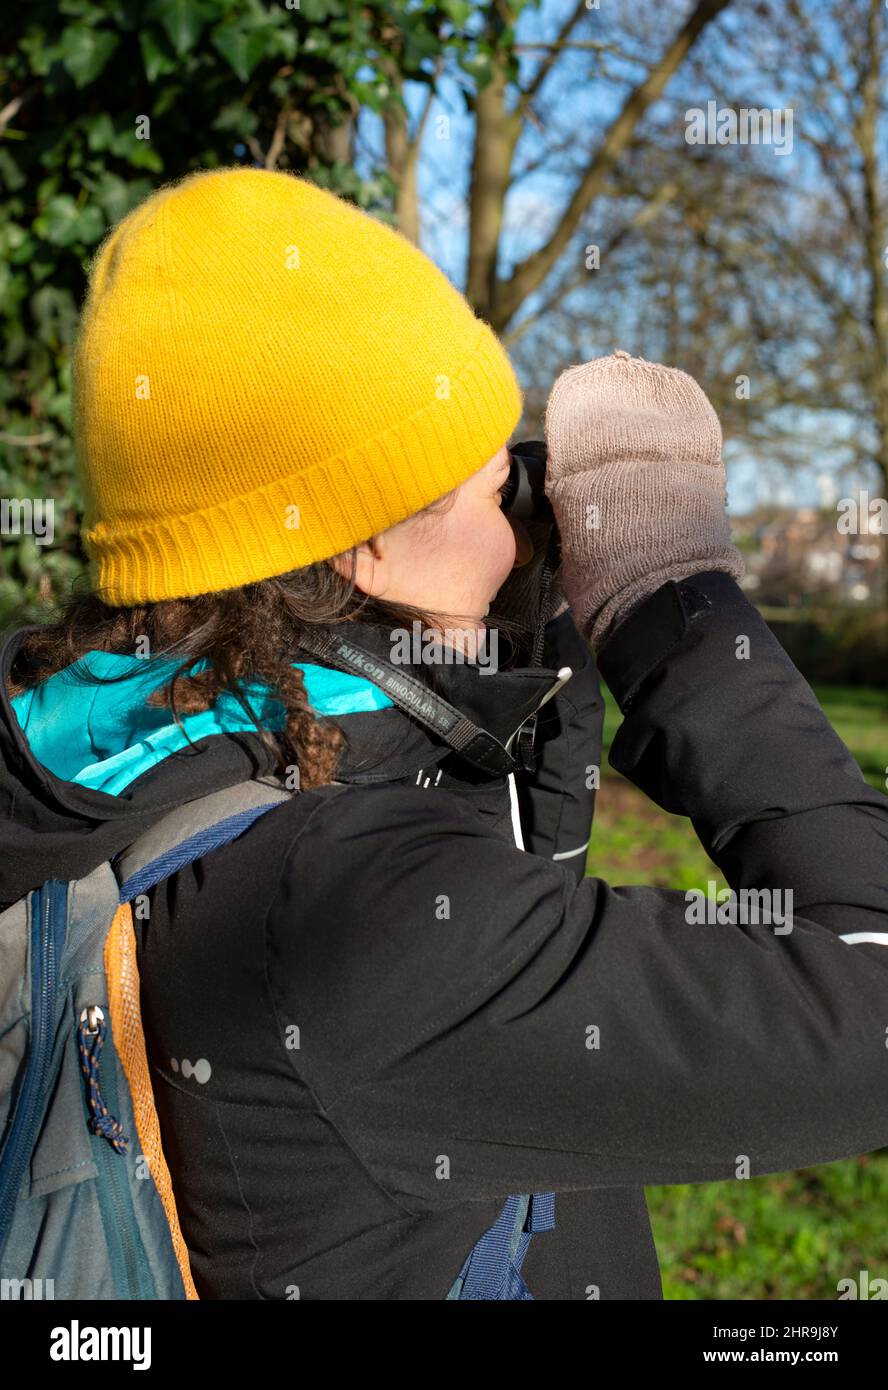 Person with hat and gloves birdwatching on a sunny winter day in nature Stock Photo